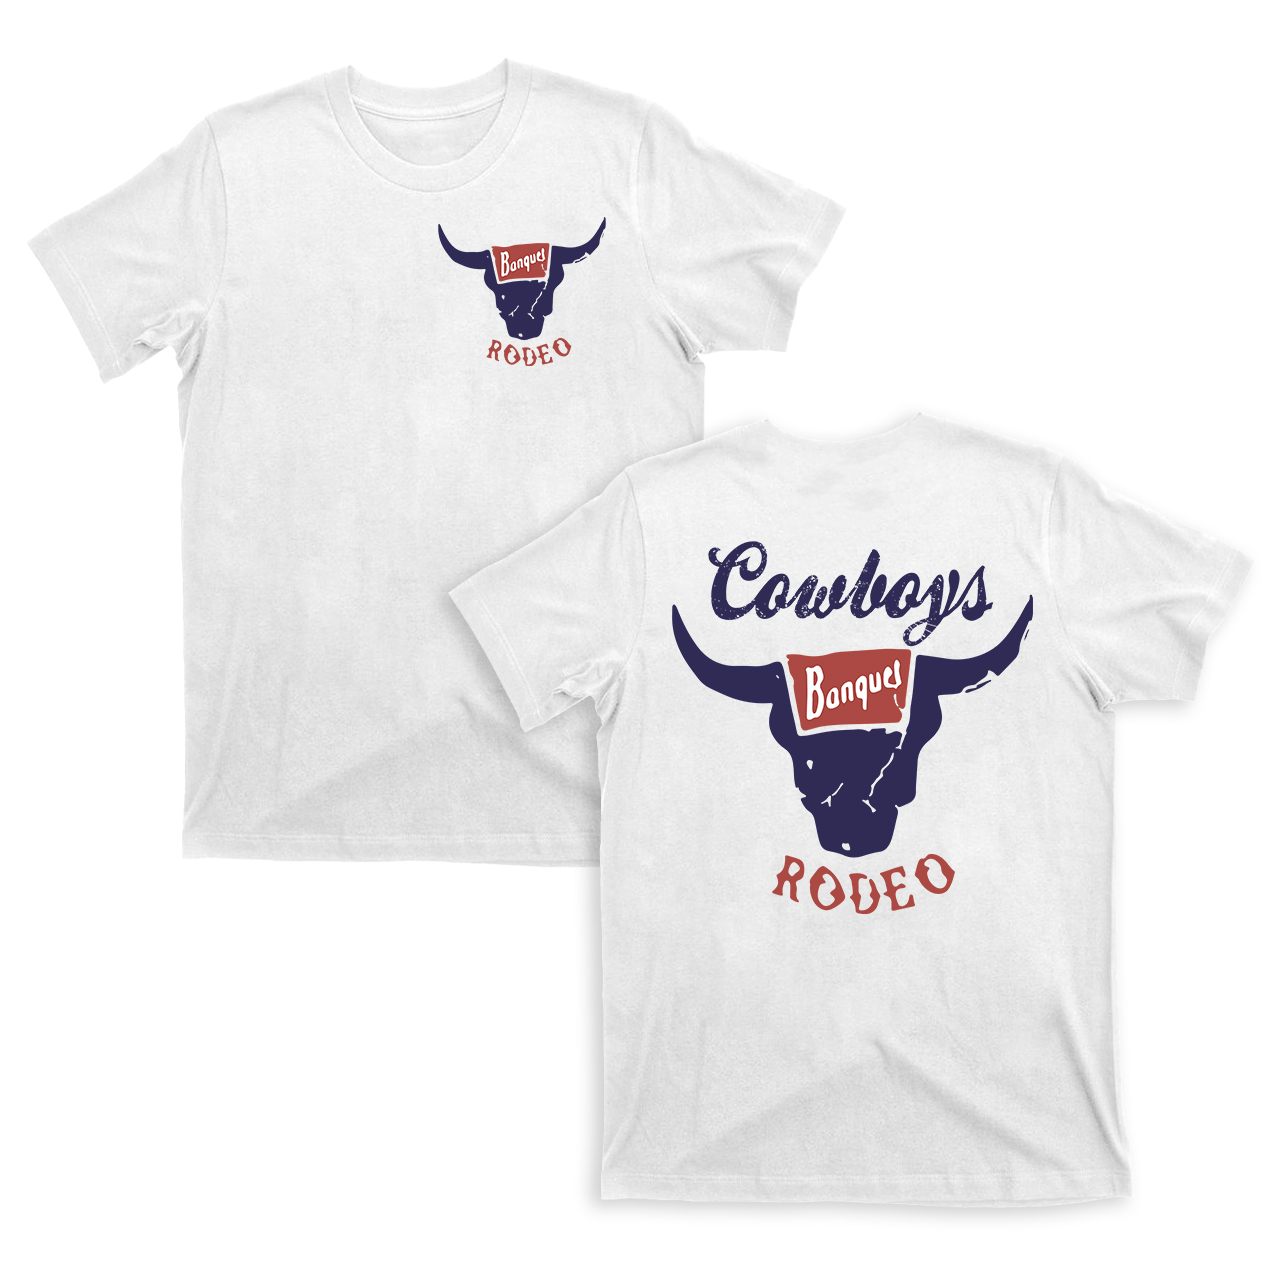 Cowboy Banquet Rodeo Retro-Inspired Tees